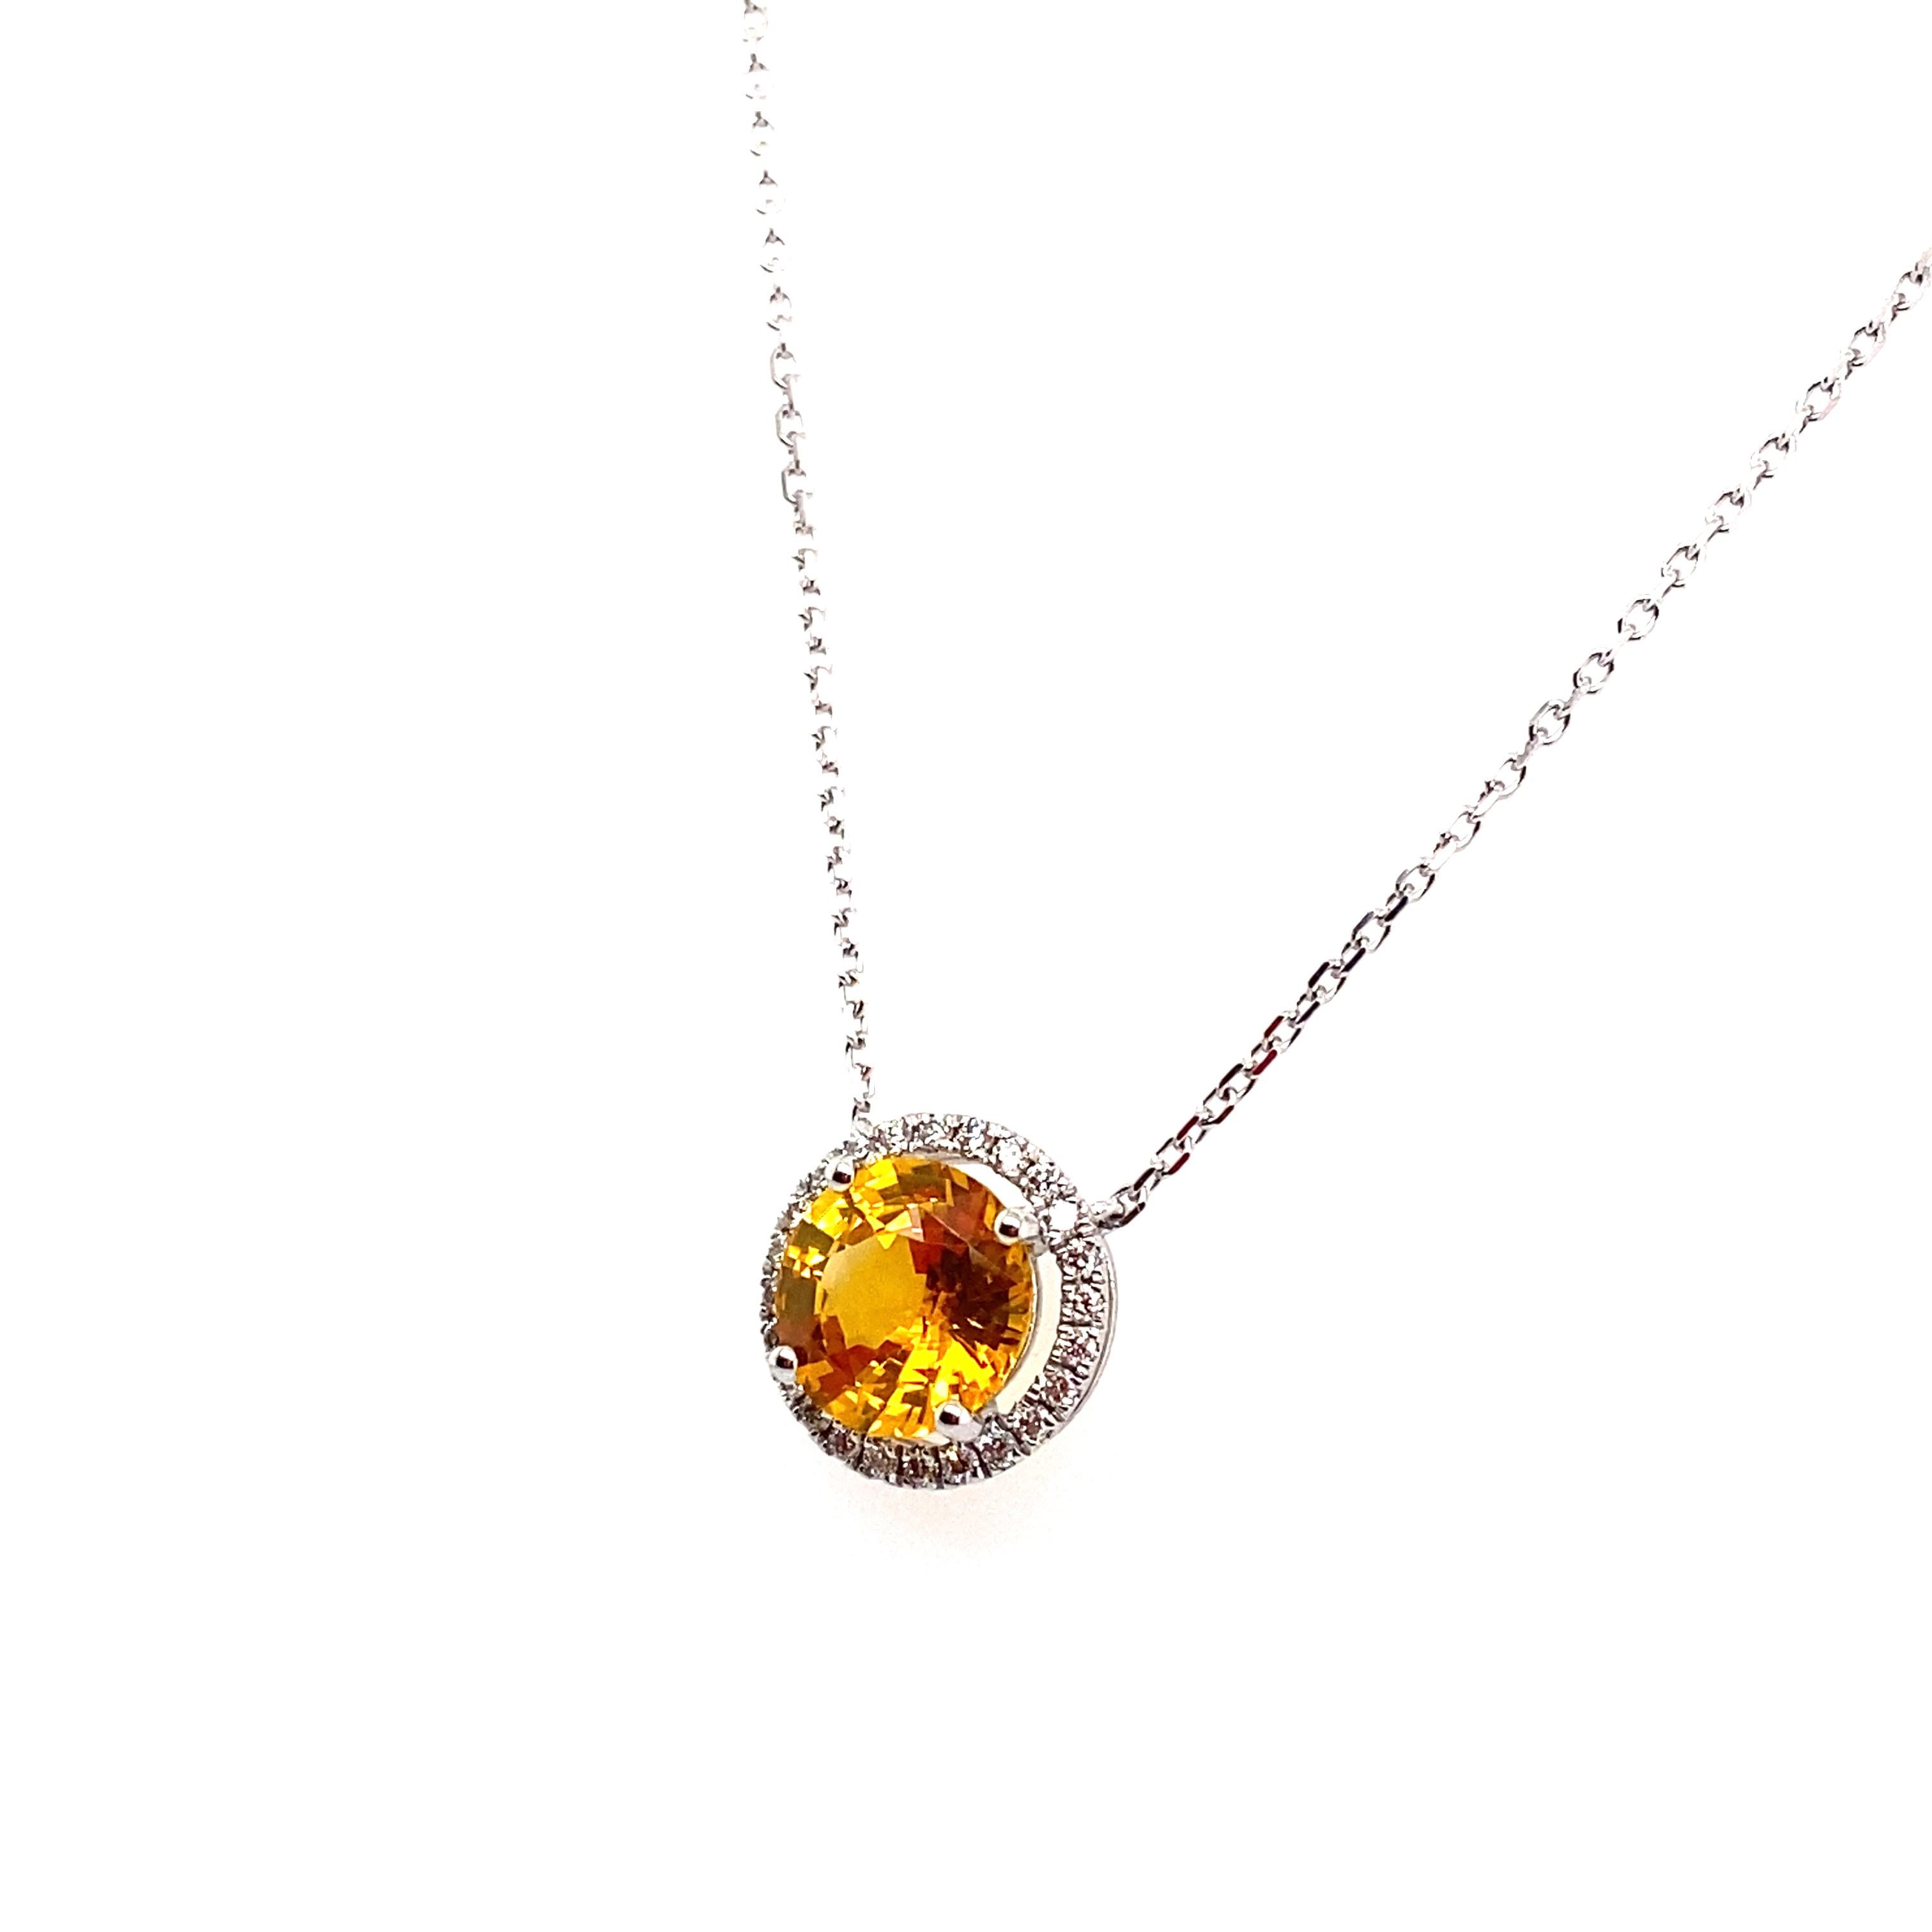 Women's or Men's 2.11 Carat Yellow Sapphire and Diamond Pendant Necklace For Sale